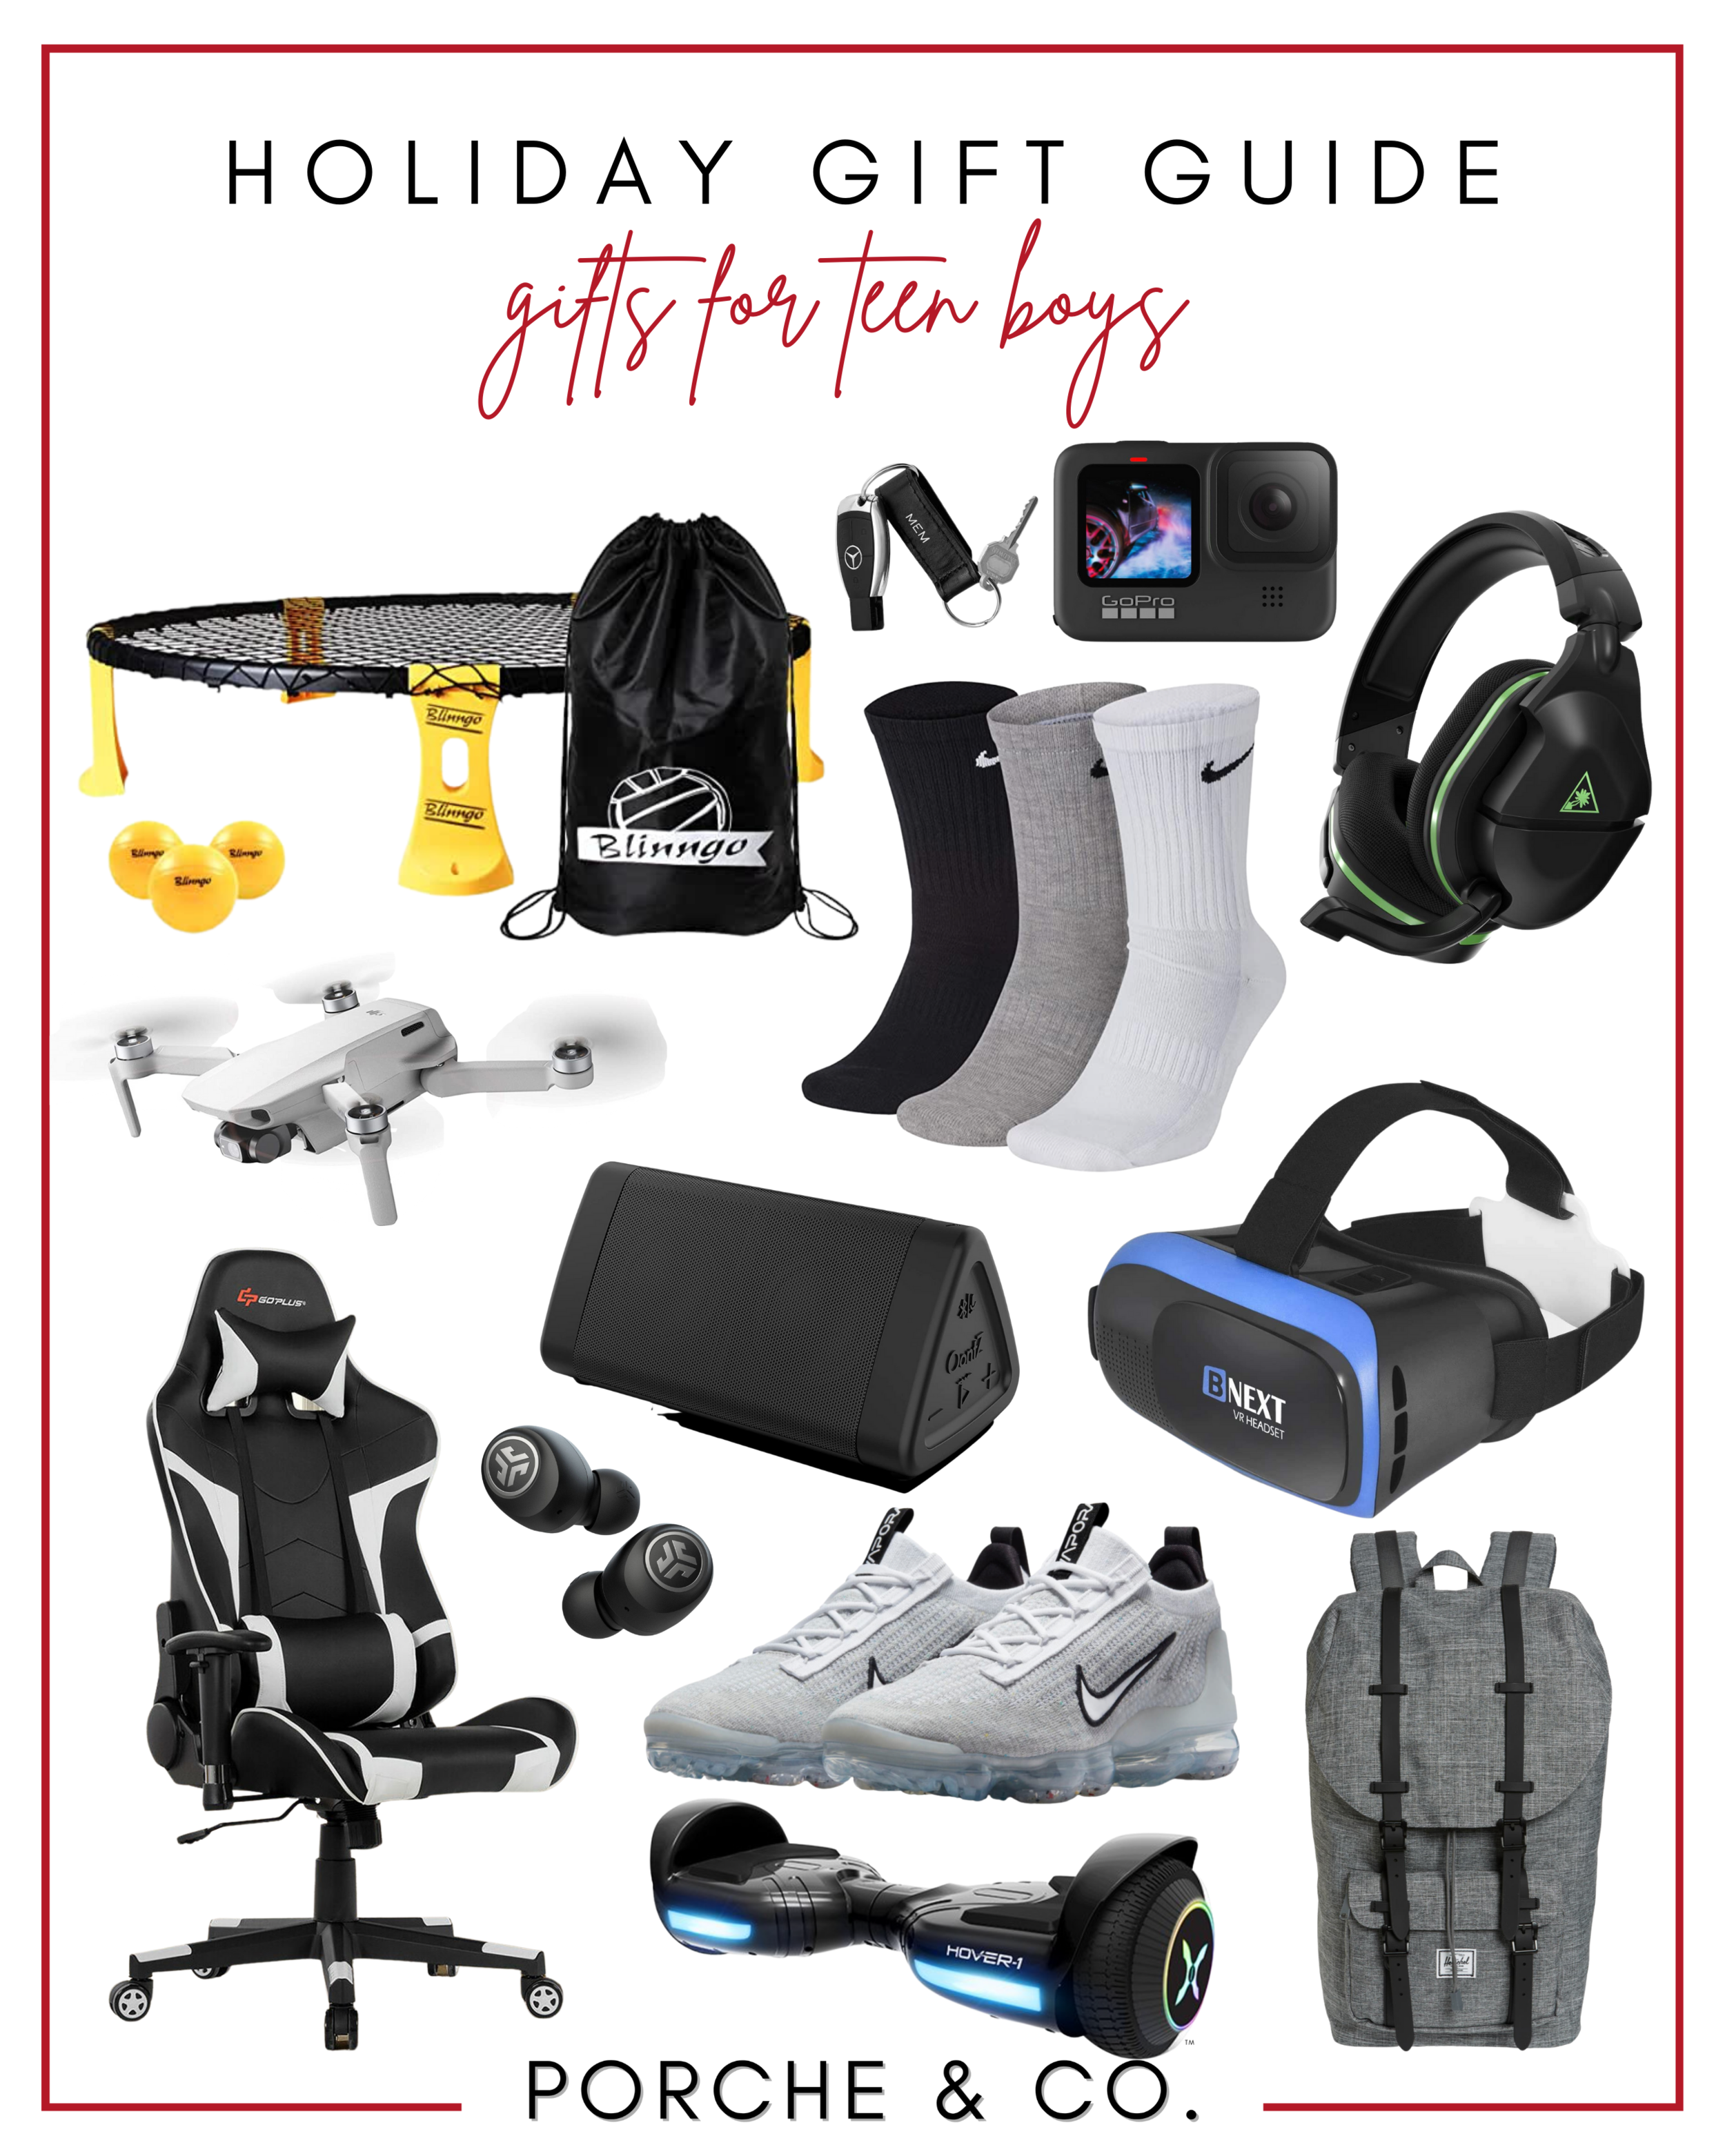 gifts for teen boys (Copy)